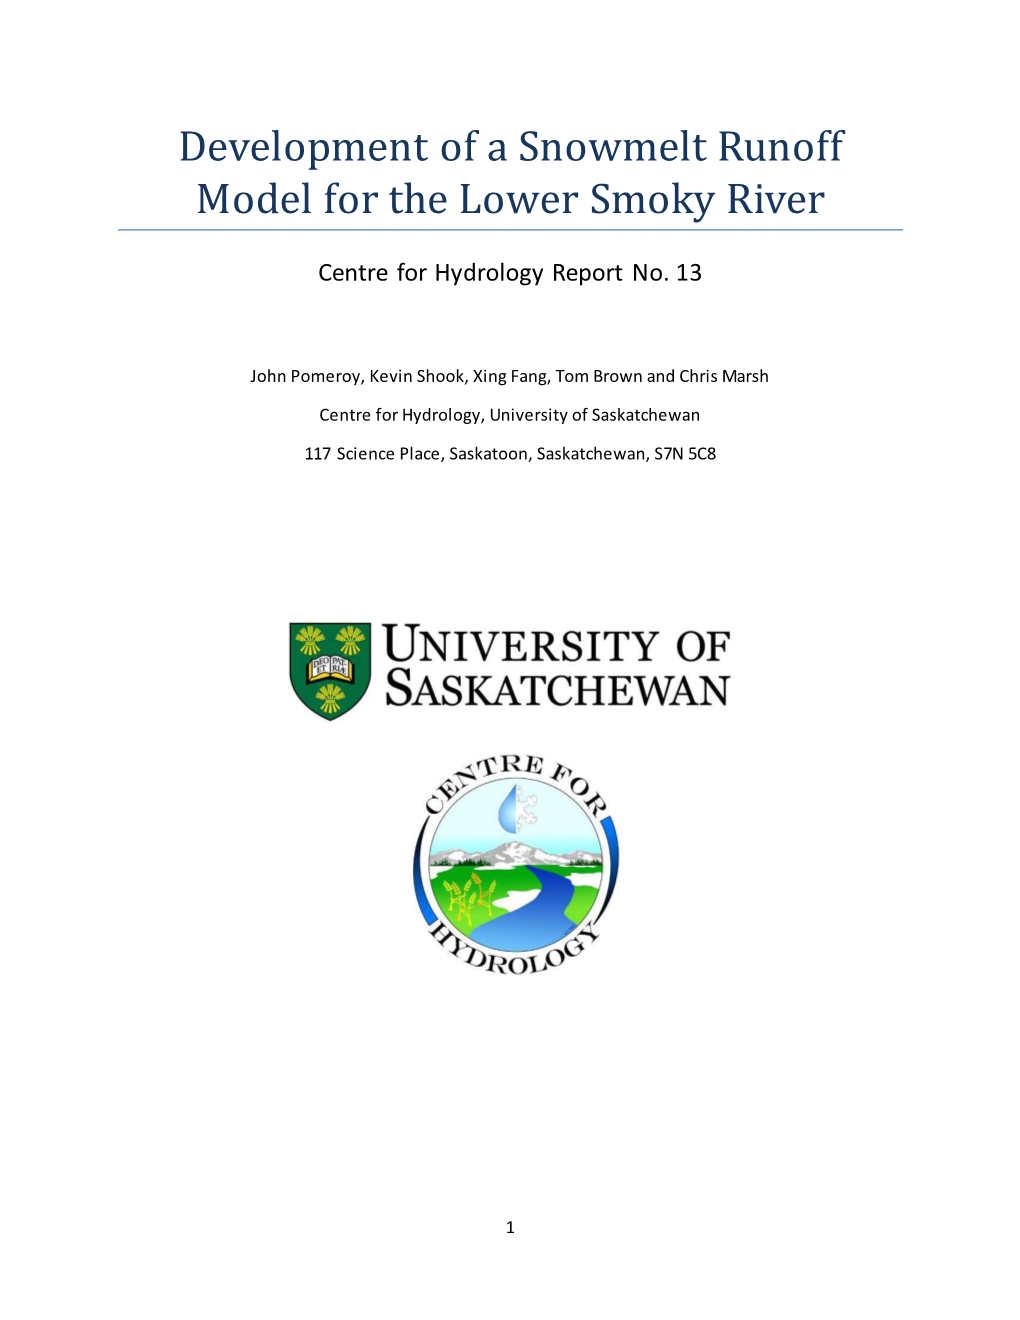 Development of a Snowmelt Runoff Model for the Lower Smoky River